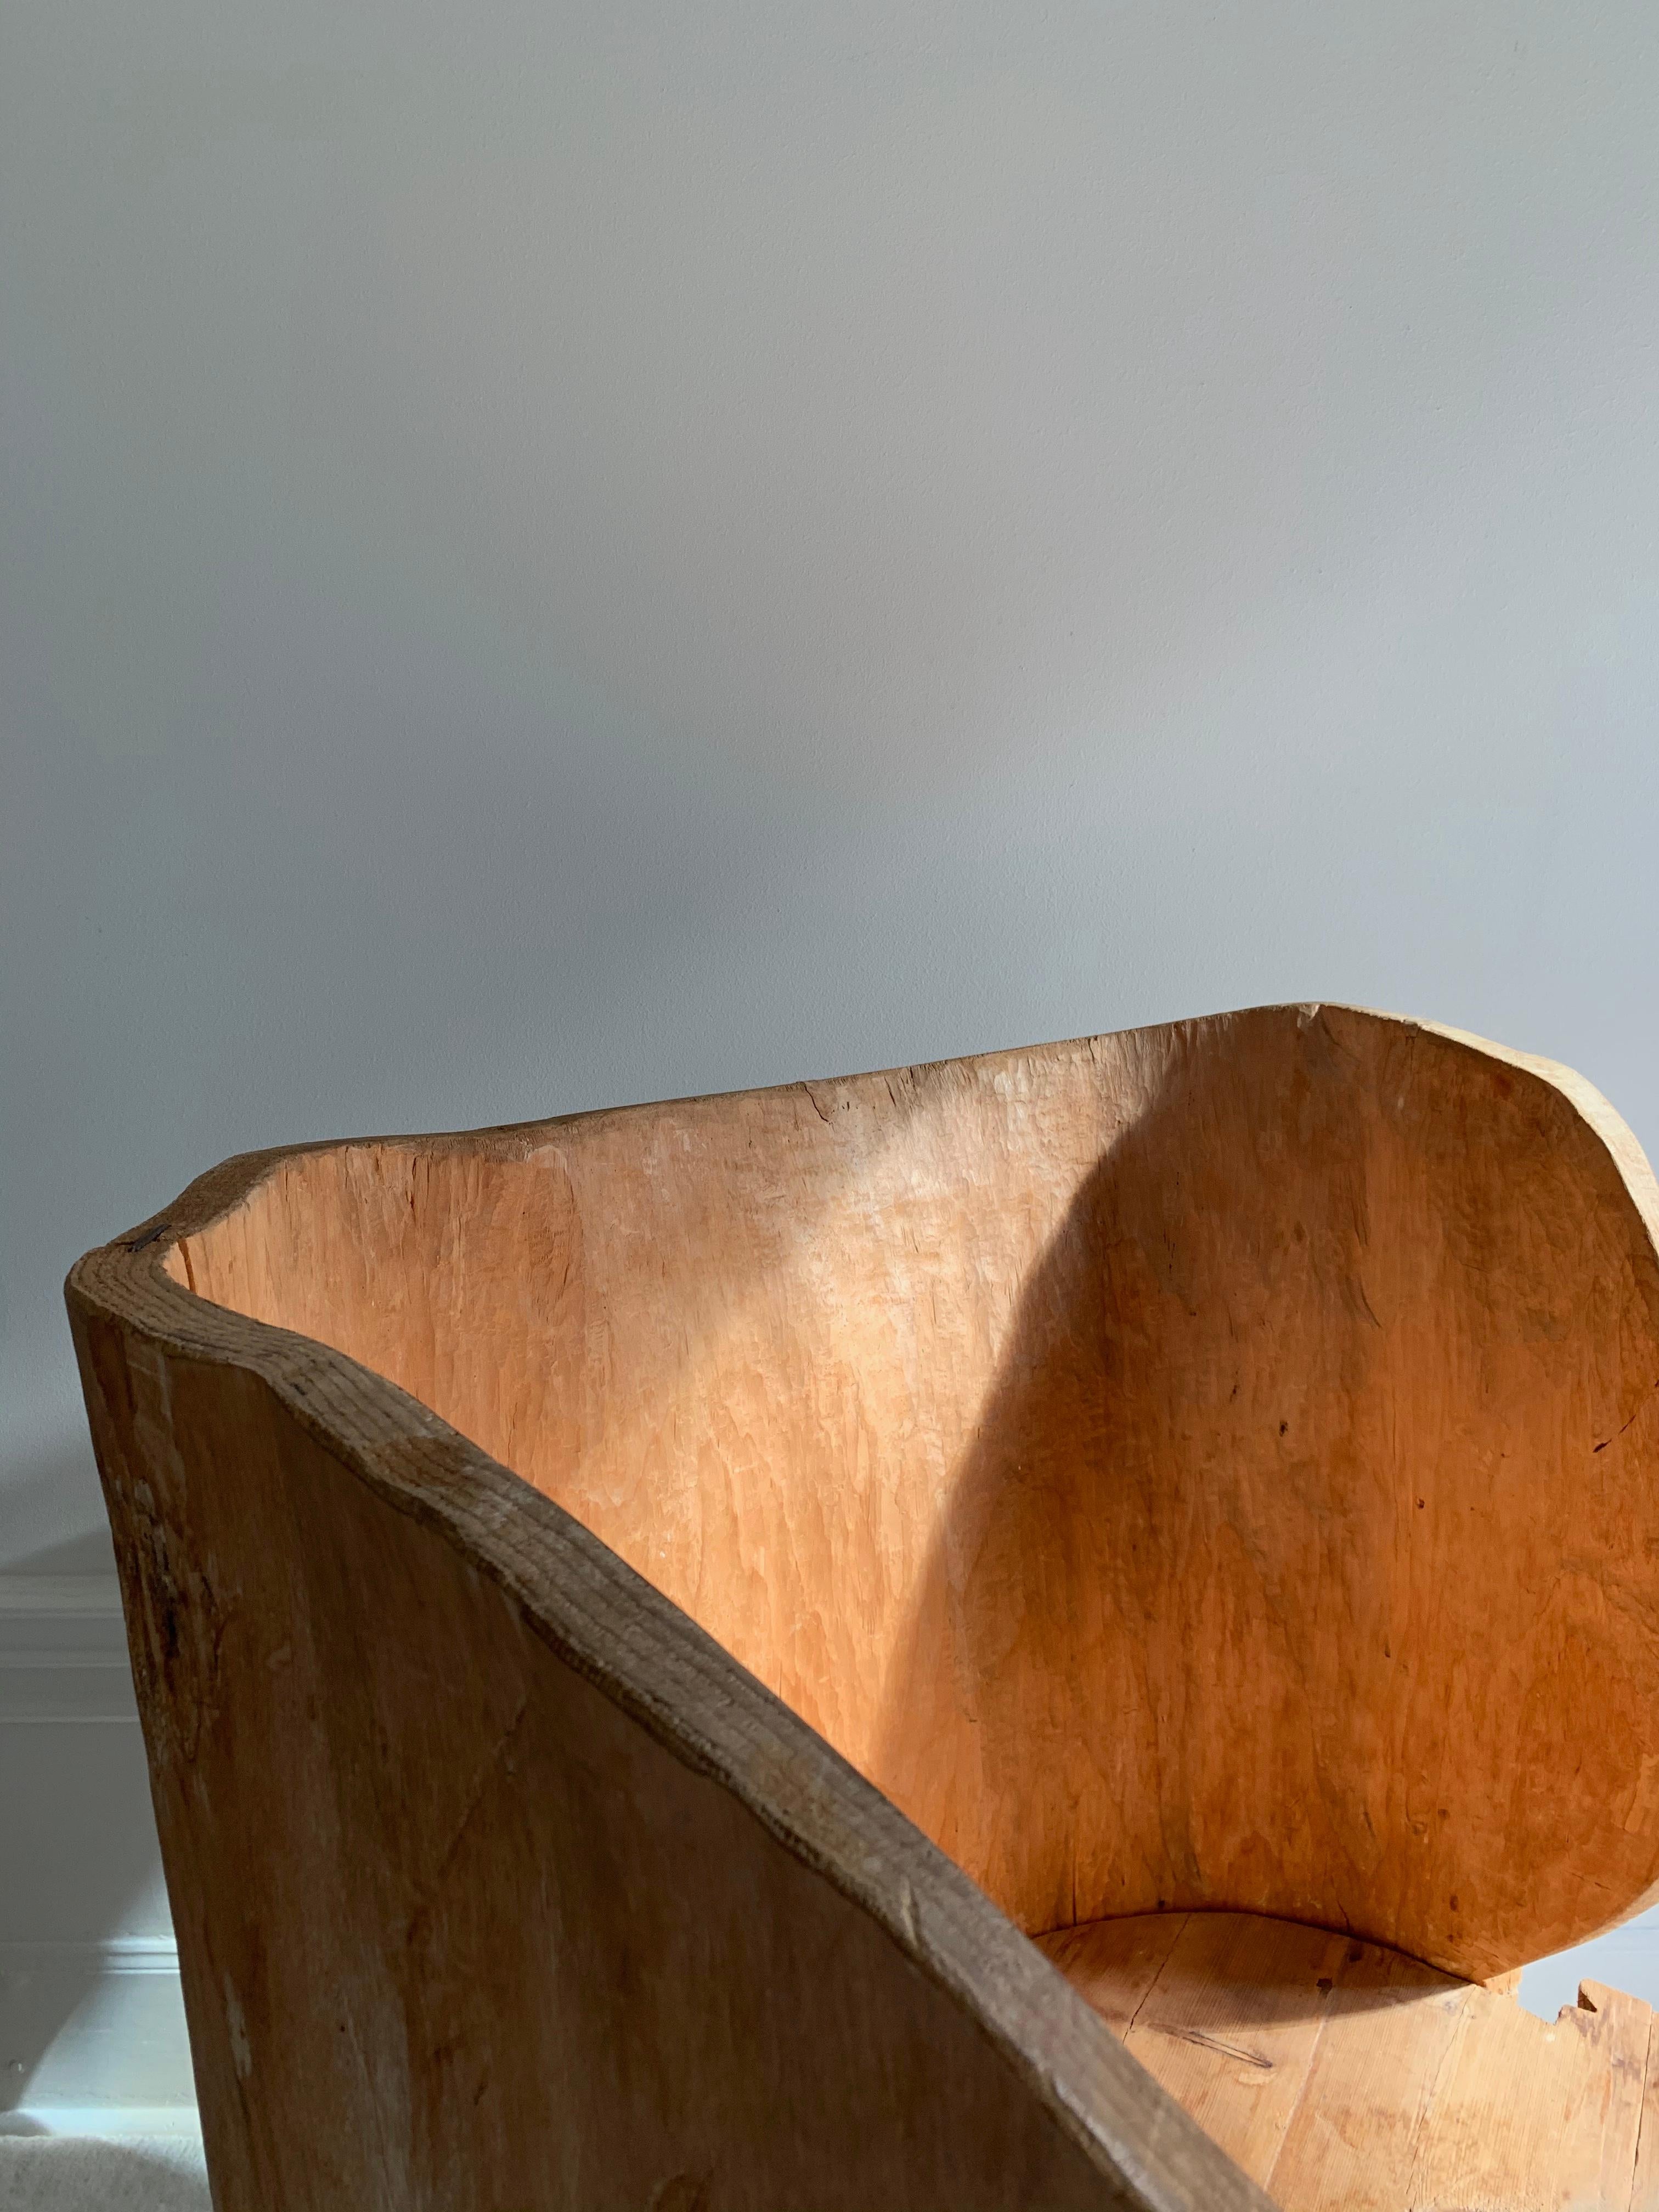 Hand-Crafted Swedish Sculptural Brutalist Stump Chair in Pine, circa 1950s